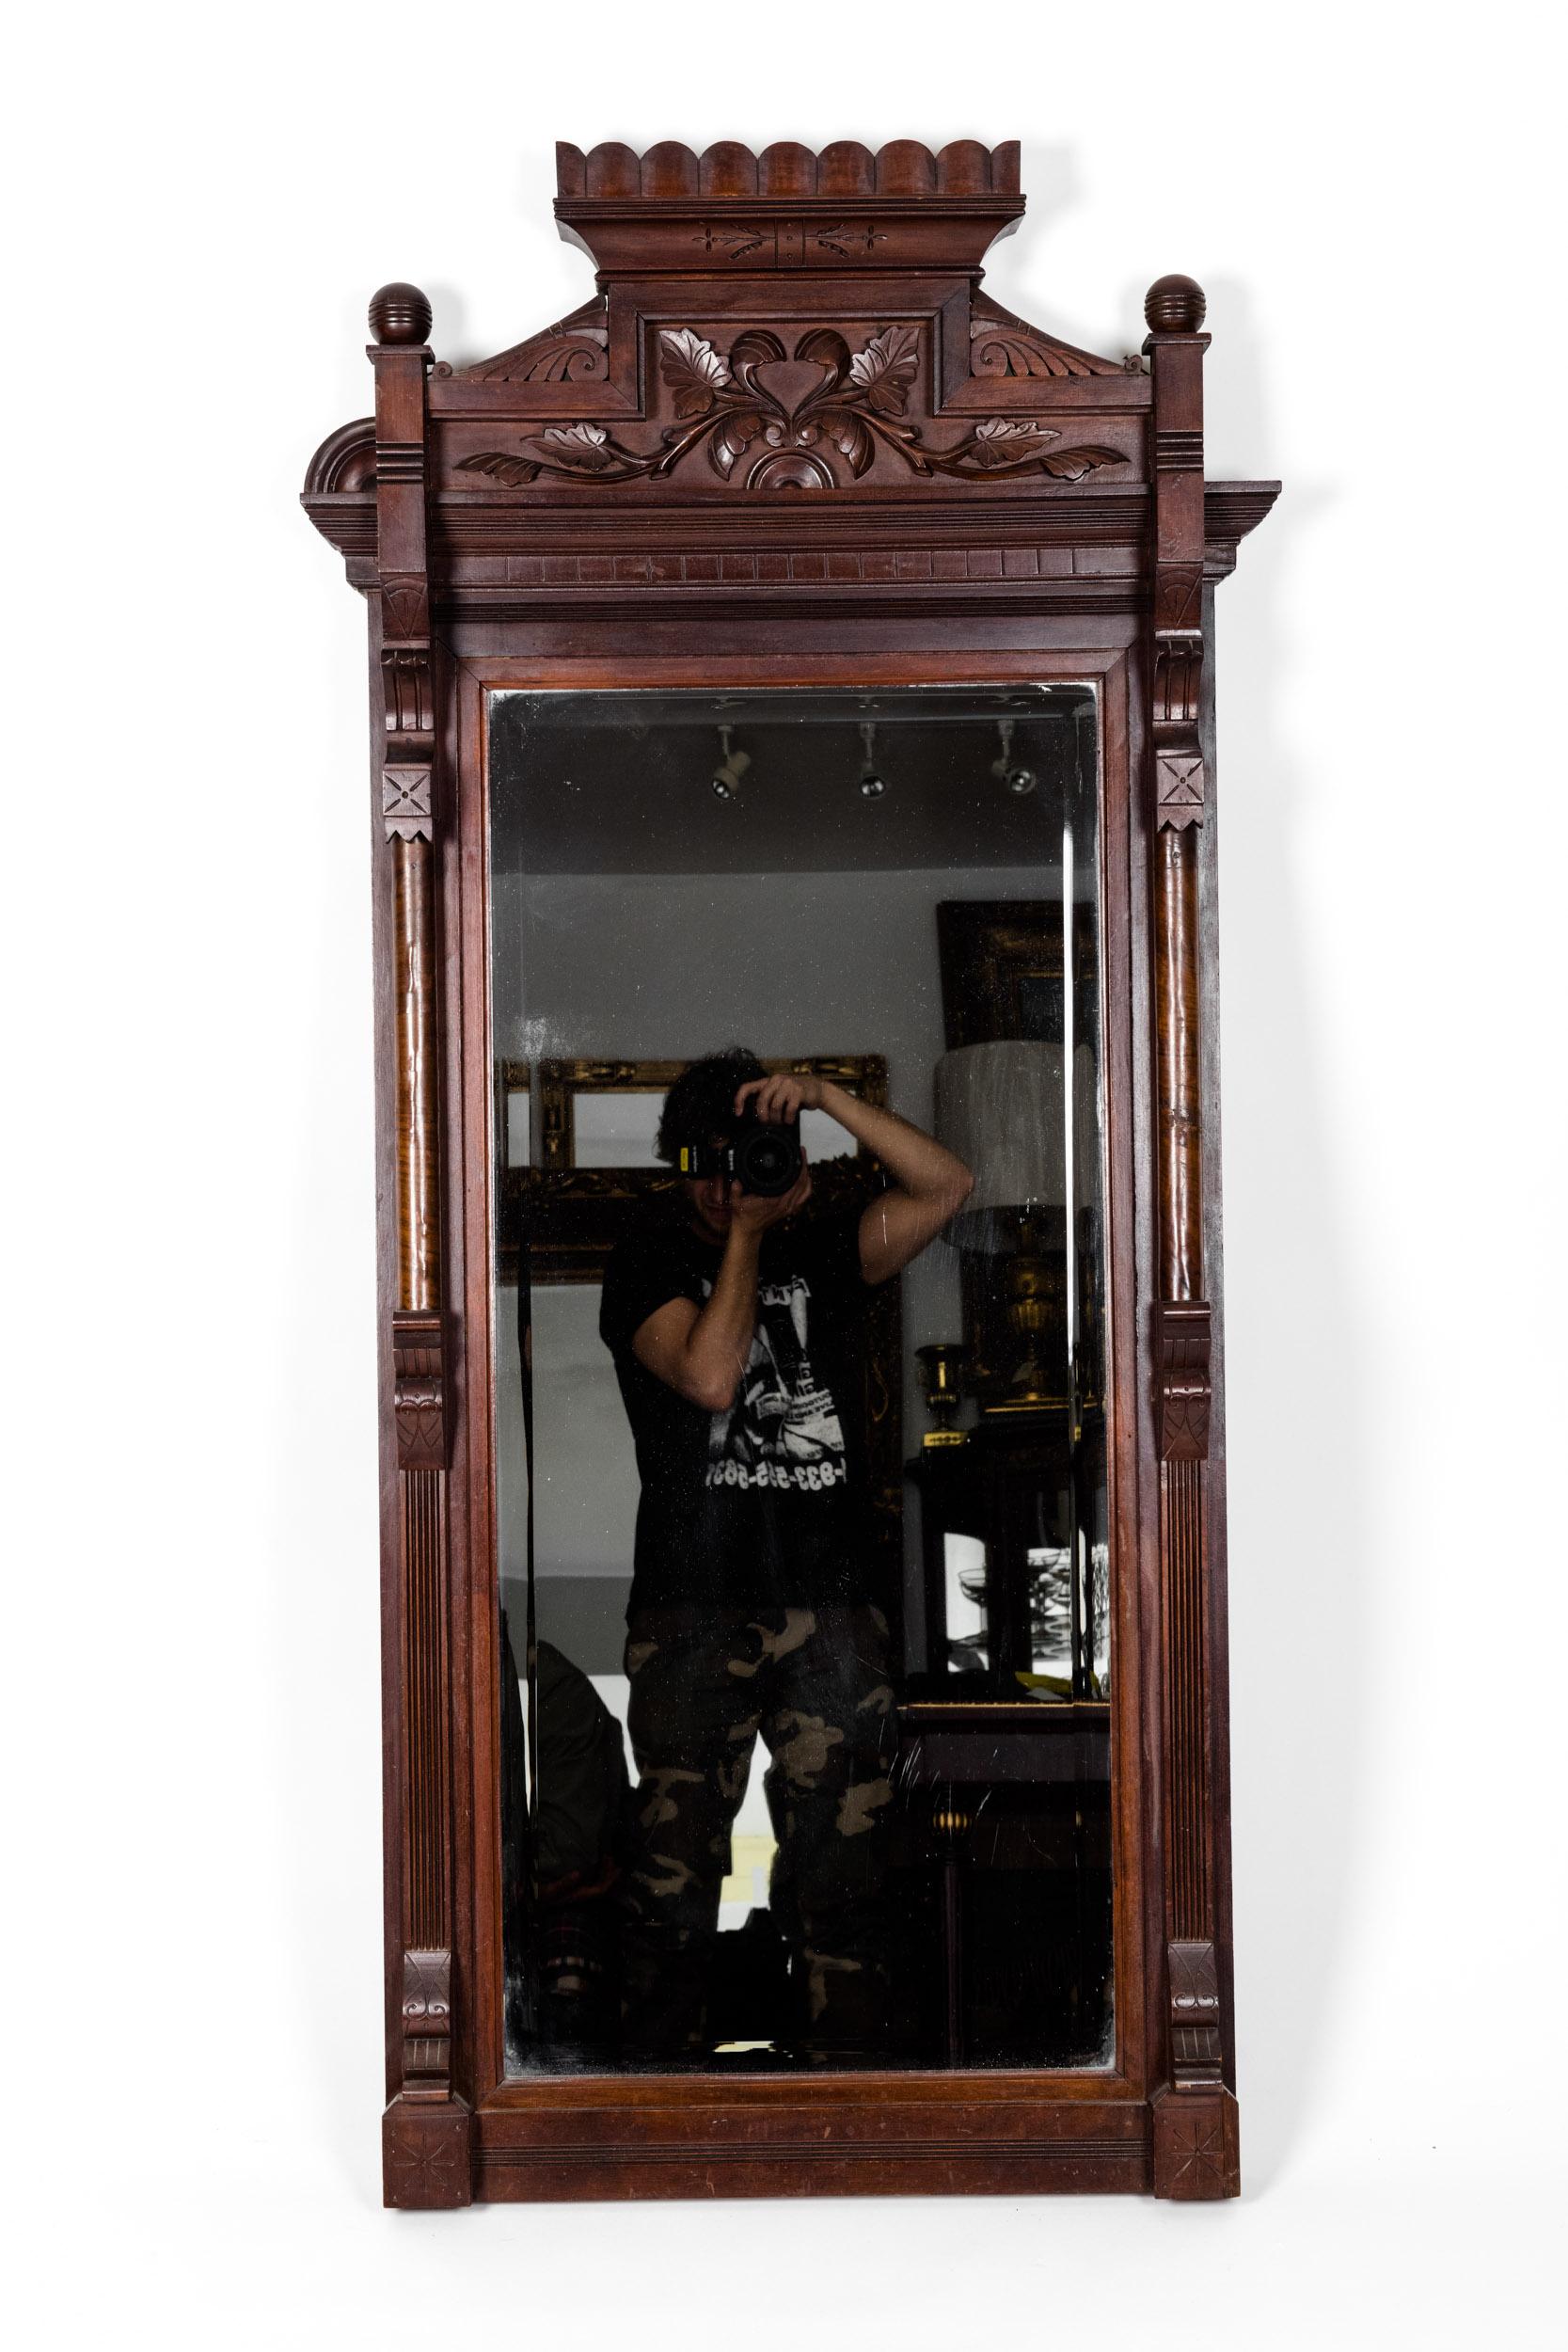 Highly carved Mahogany wood framed Victorian style rectangle hanging wall mirror with finely carved wood arch design top. The mirror is in excellent antique condition. Minor wear consistent with age or use. The mirror measure about 57 inches length